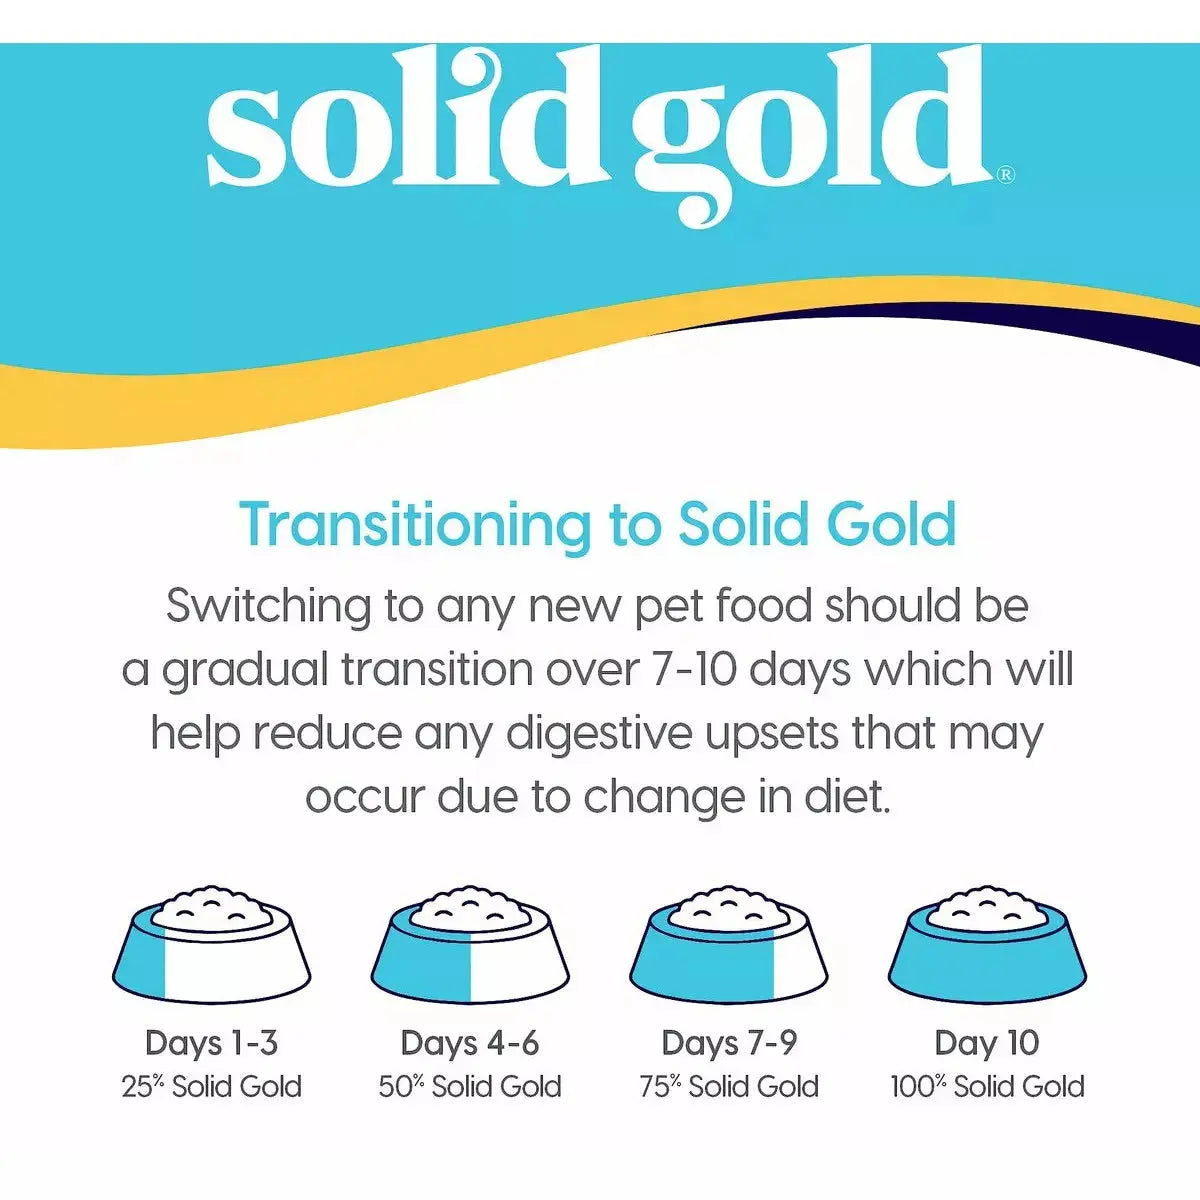 Solid Gold® Mighty Mini Grain Free Beef, Sweet Potato & Apple Recipe Toy & Small Breed Dog Food Solid Gold